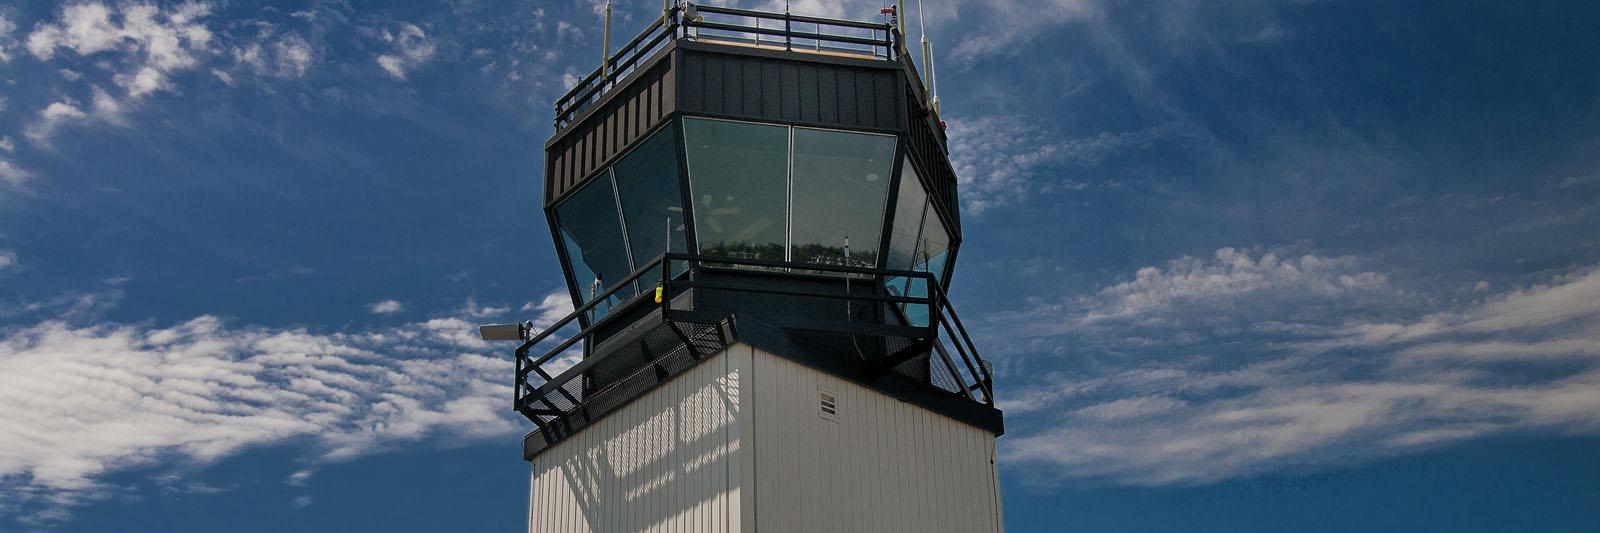 In addition to a control tower, Salem Municipal Airport has a general aviation center which includes a terminal and limited flight training. © 2011 Ron Cooper